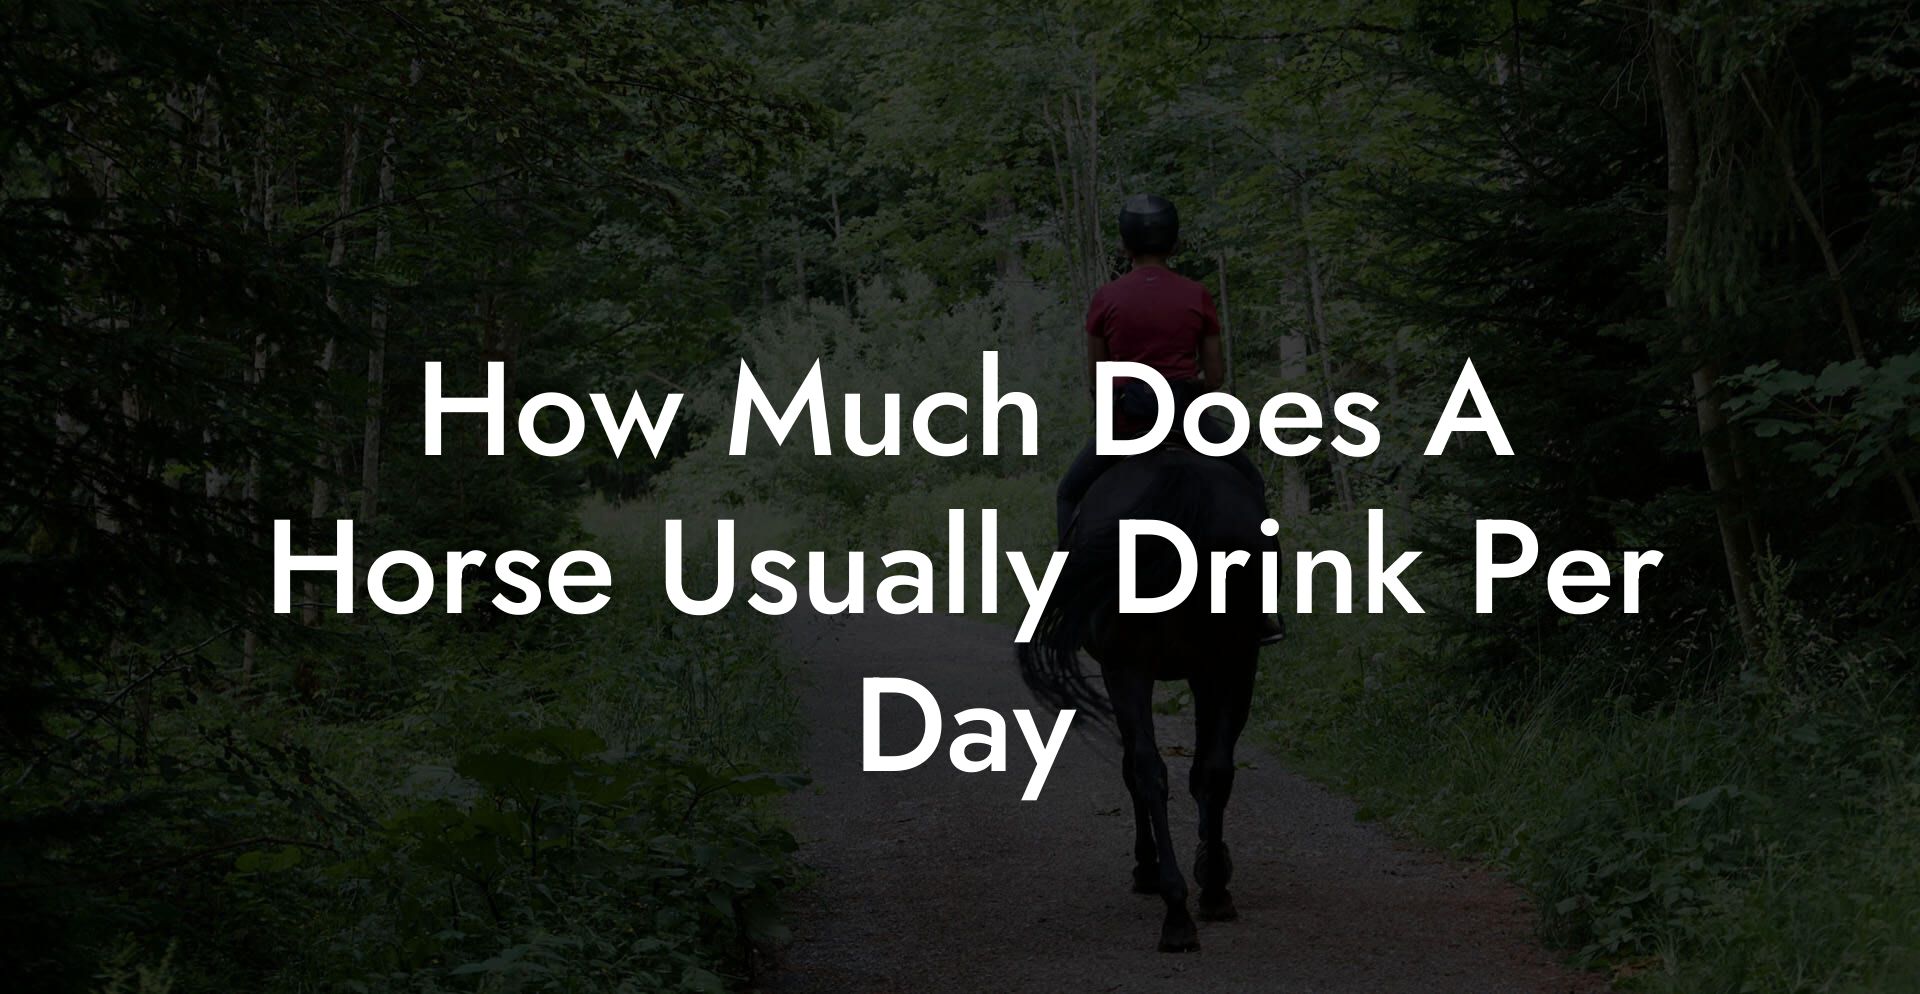 How Much Does A Horse Usually Drink Per Day